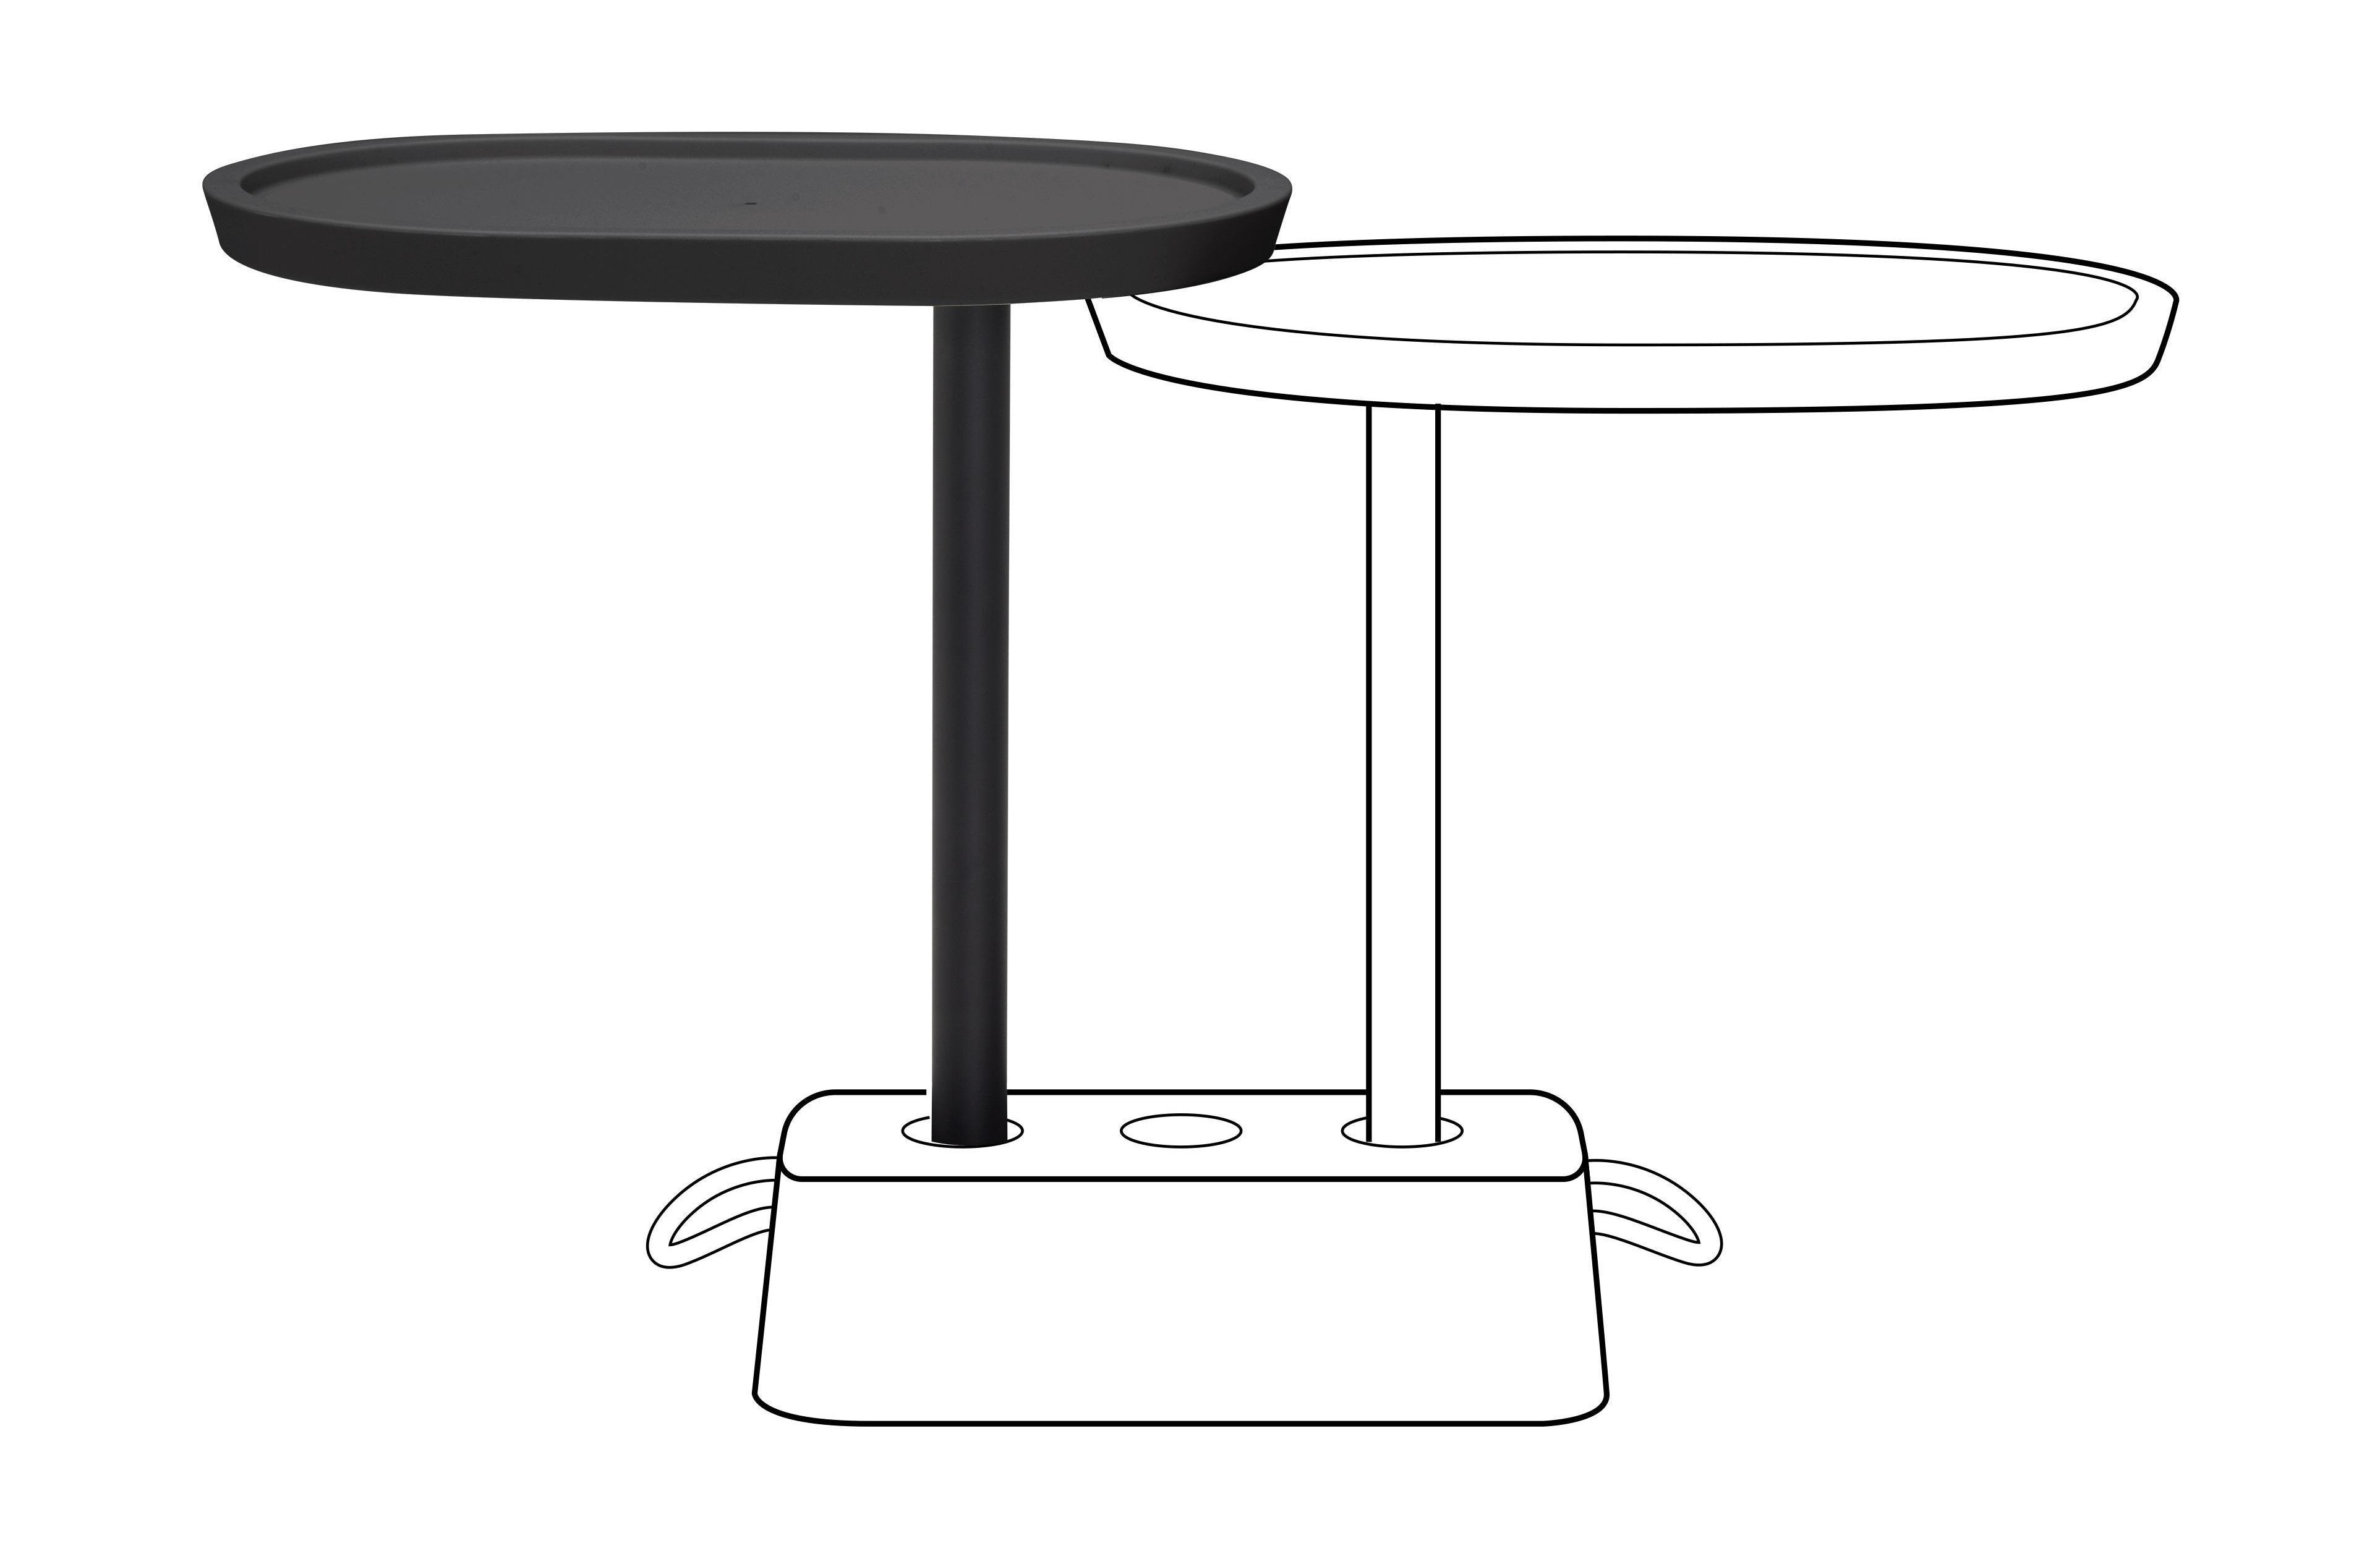 Fatboy Brick's Buddy Table, Anthracite